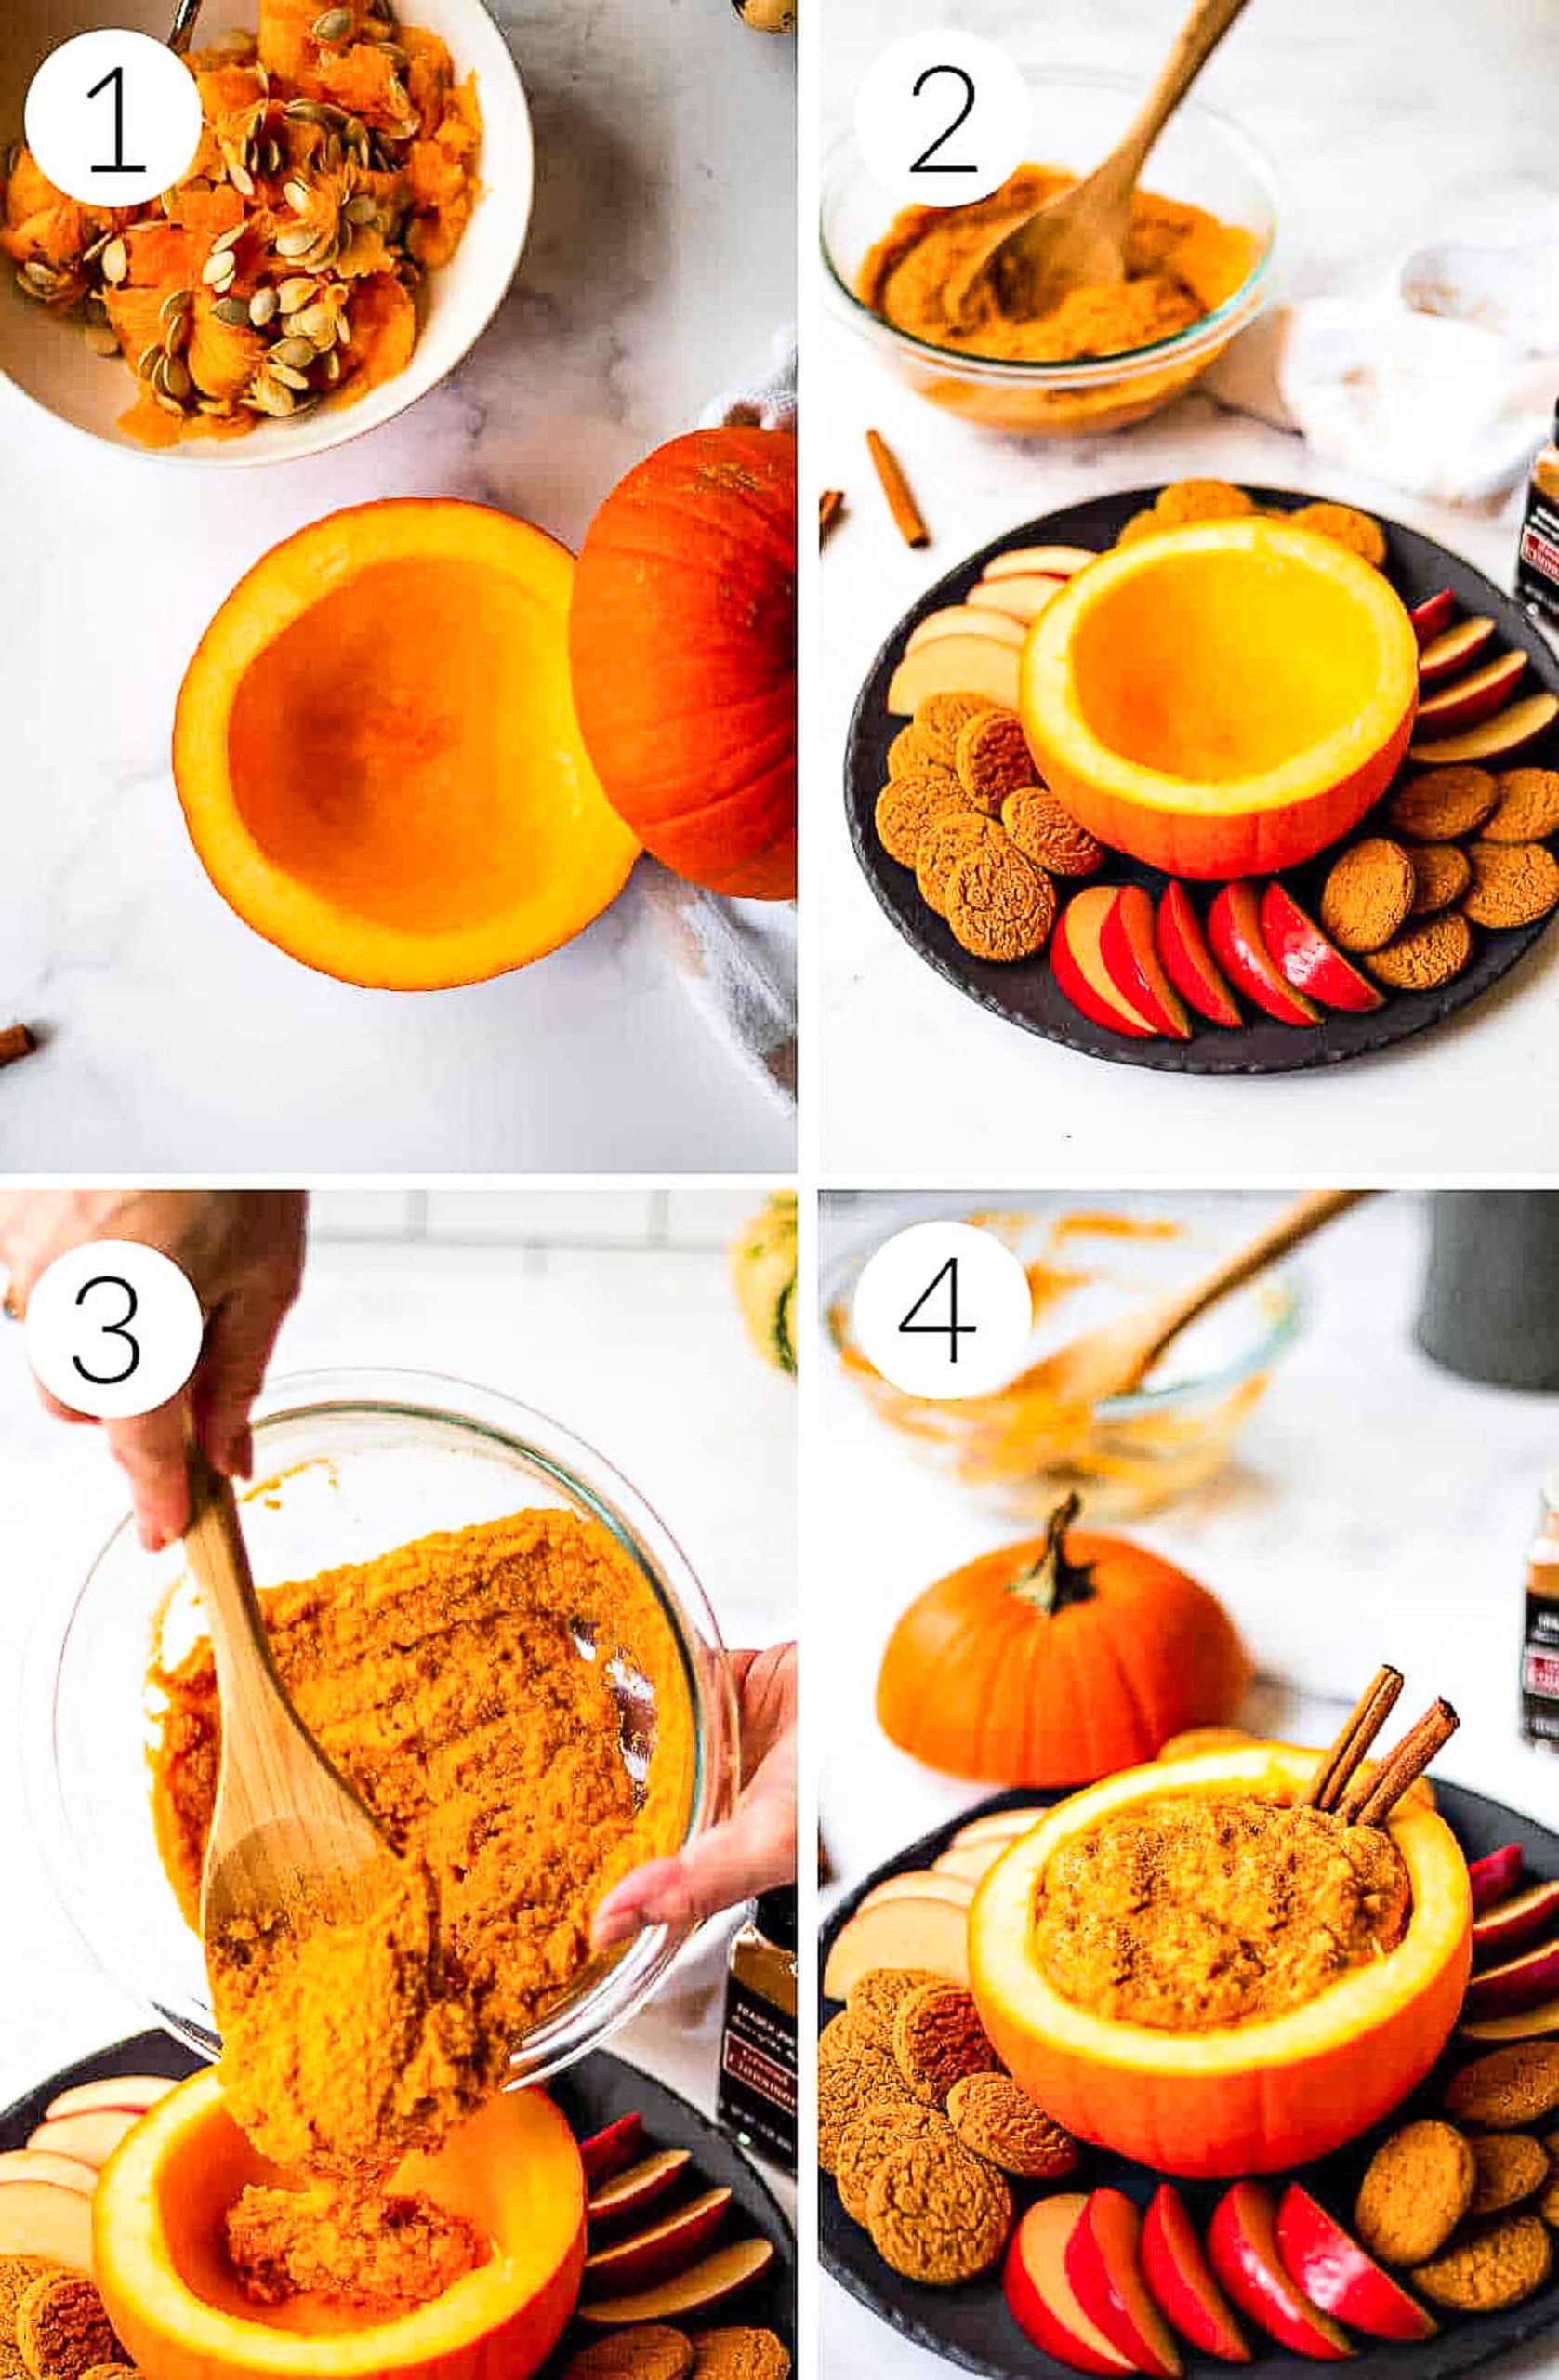 carving a pumpkin bowl and spooning dip inside.